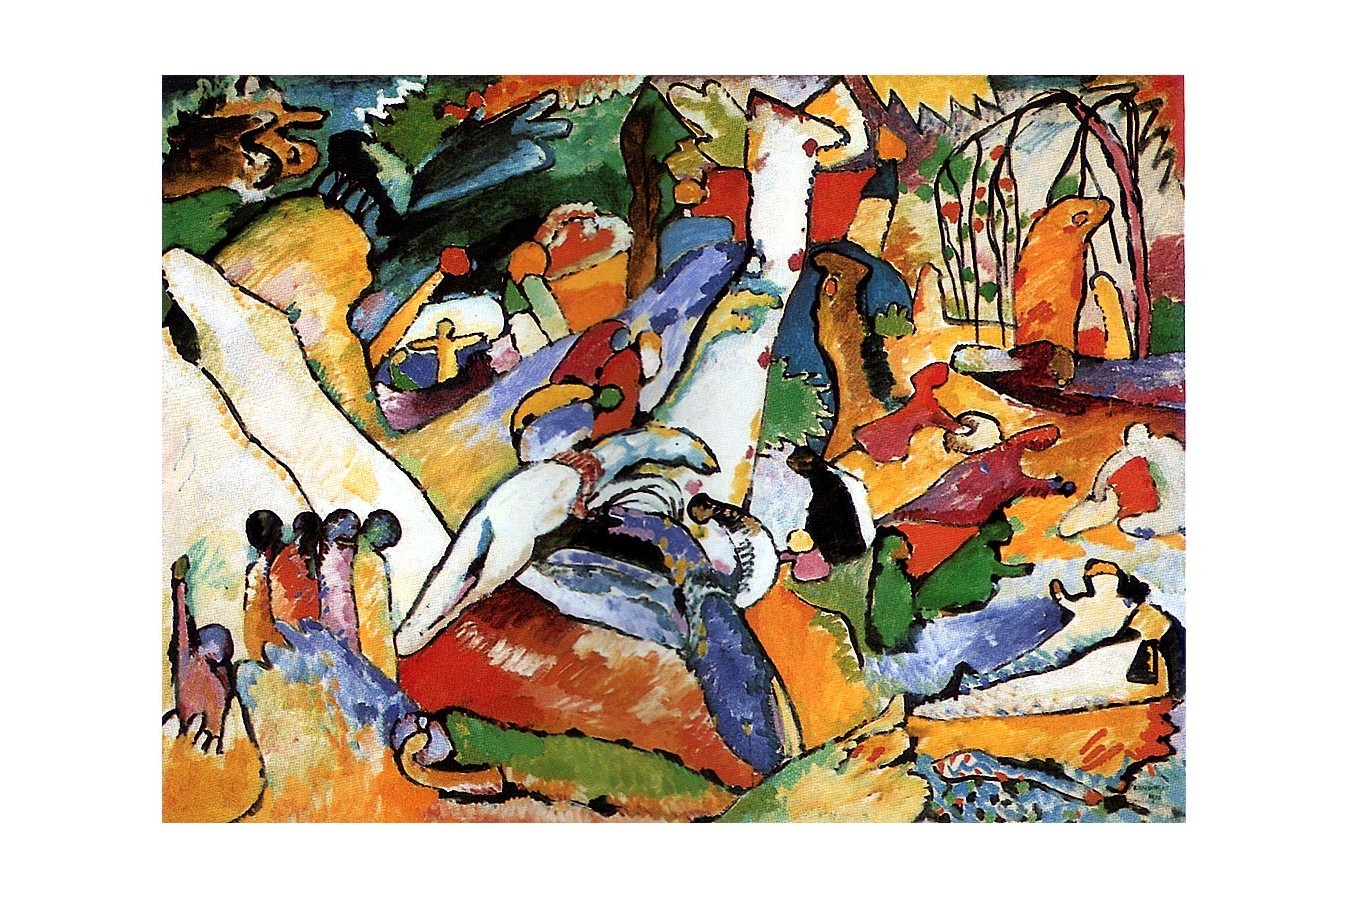 Puzzle D-Toys - Vassily Kandinsky: Sketch for "Composition II" / study, 1.000 piese (72849-1)